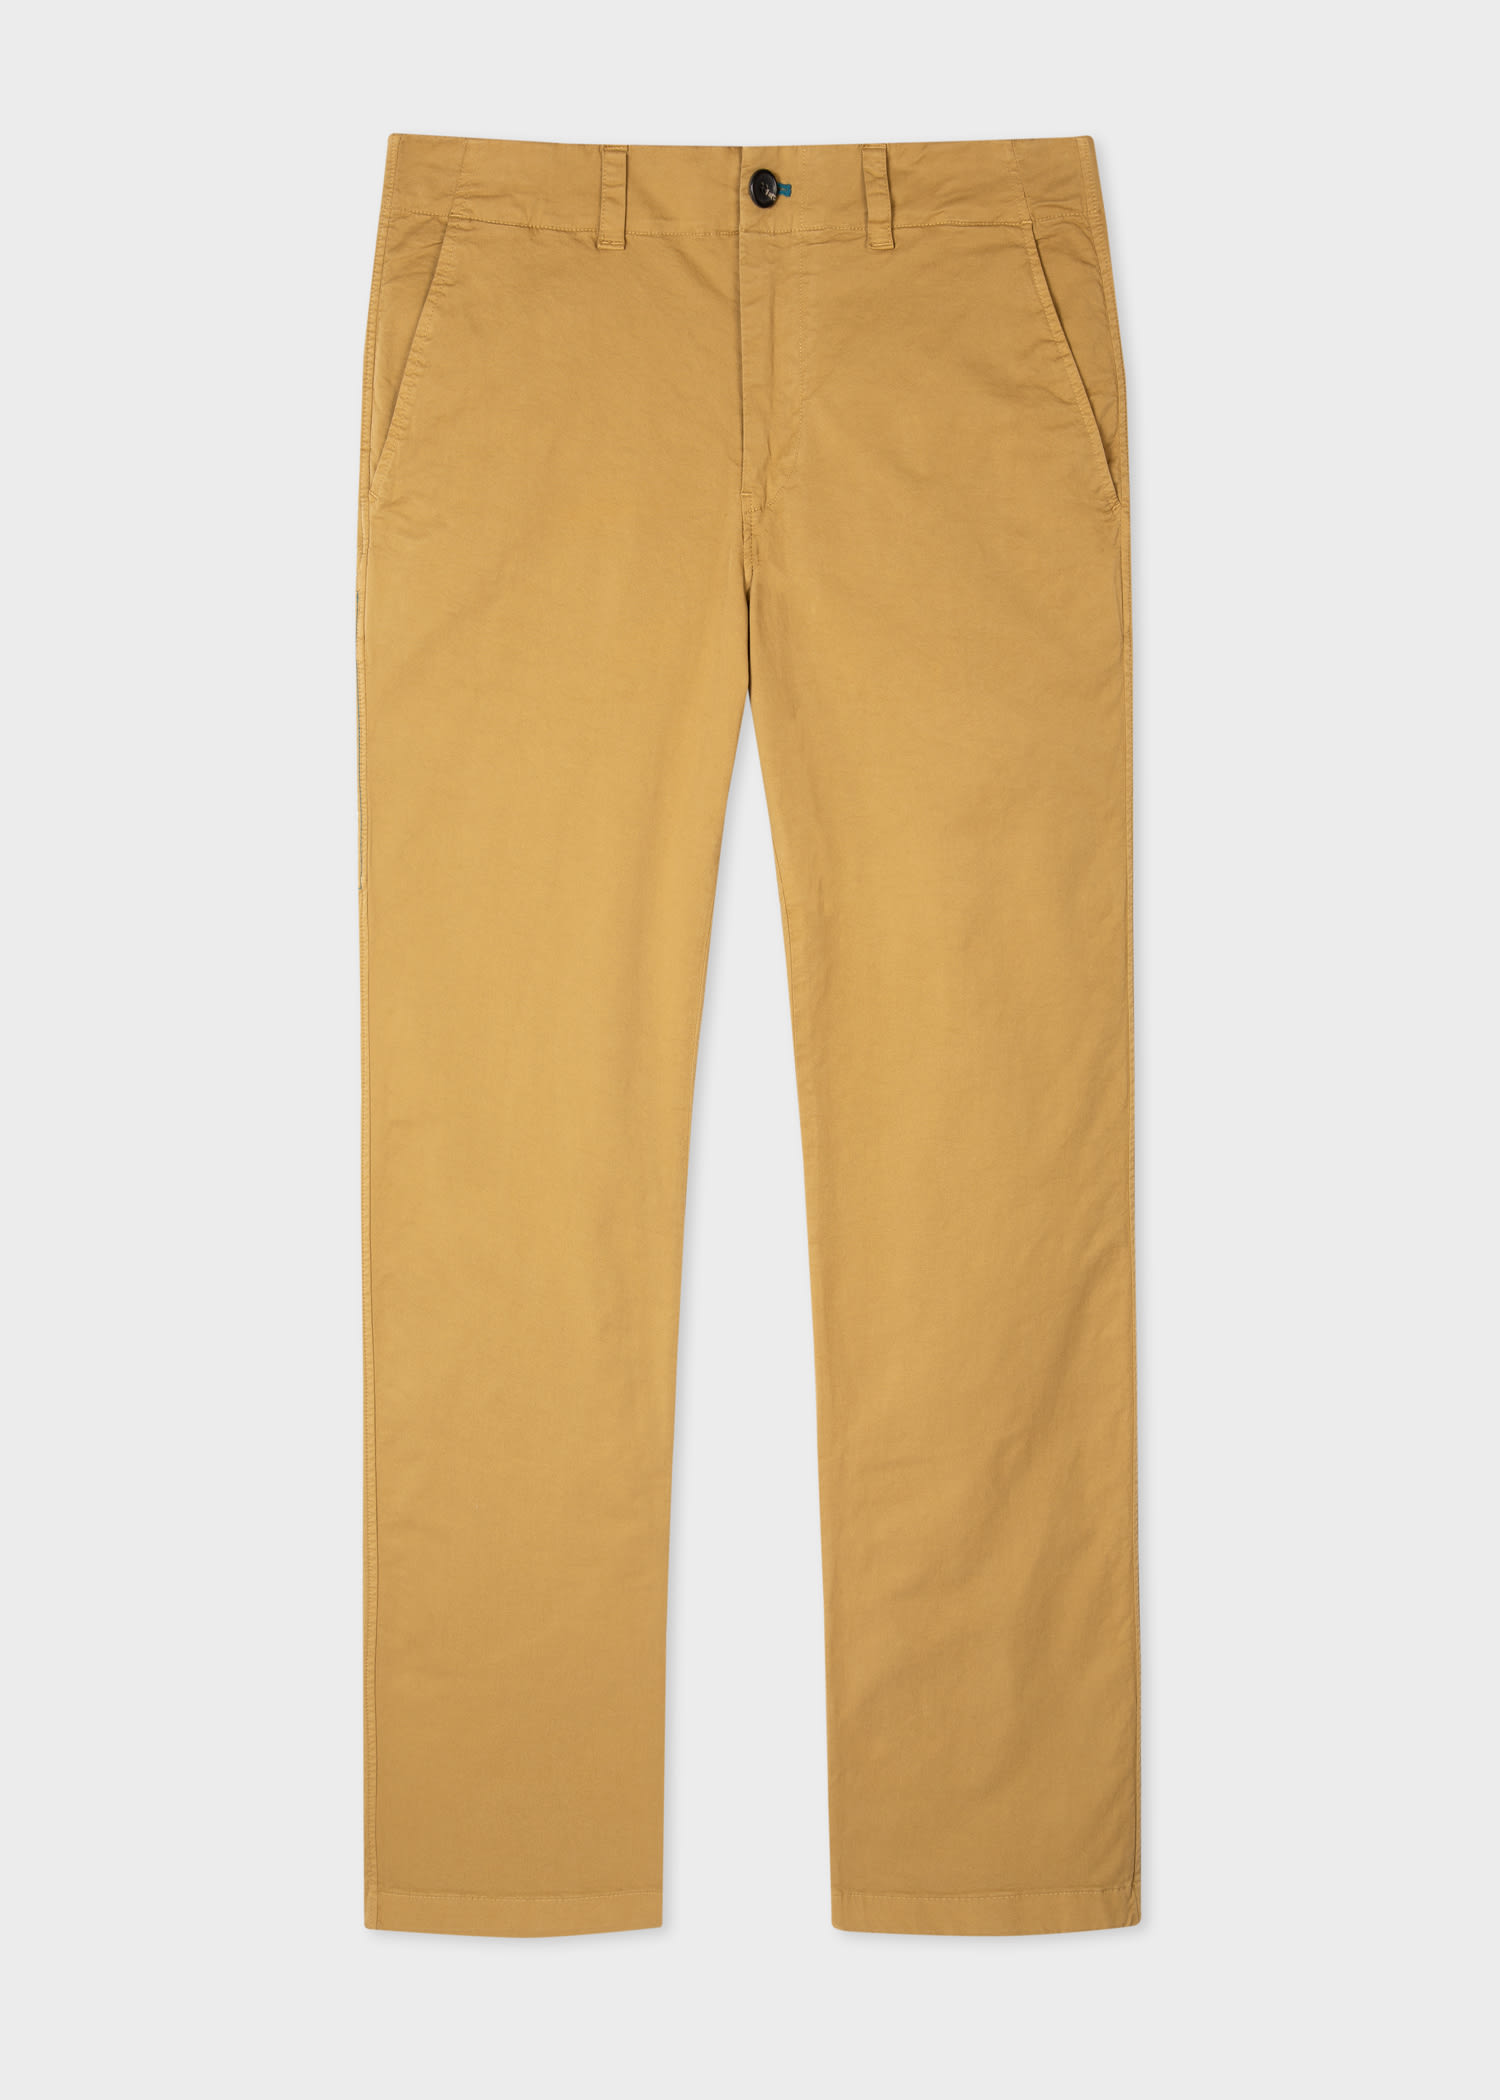 Men's Designer Trousers | Chinos, Casual, & Suit Trousers - Paul Smith